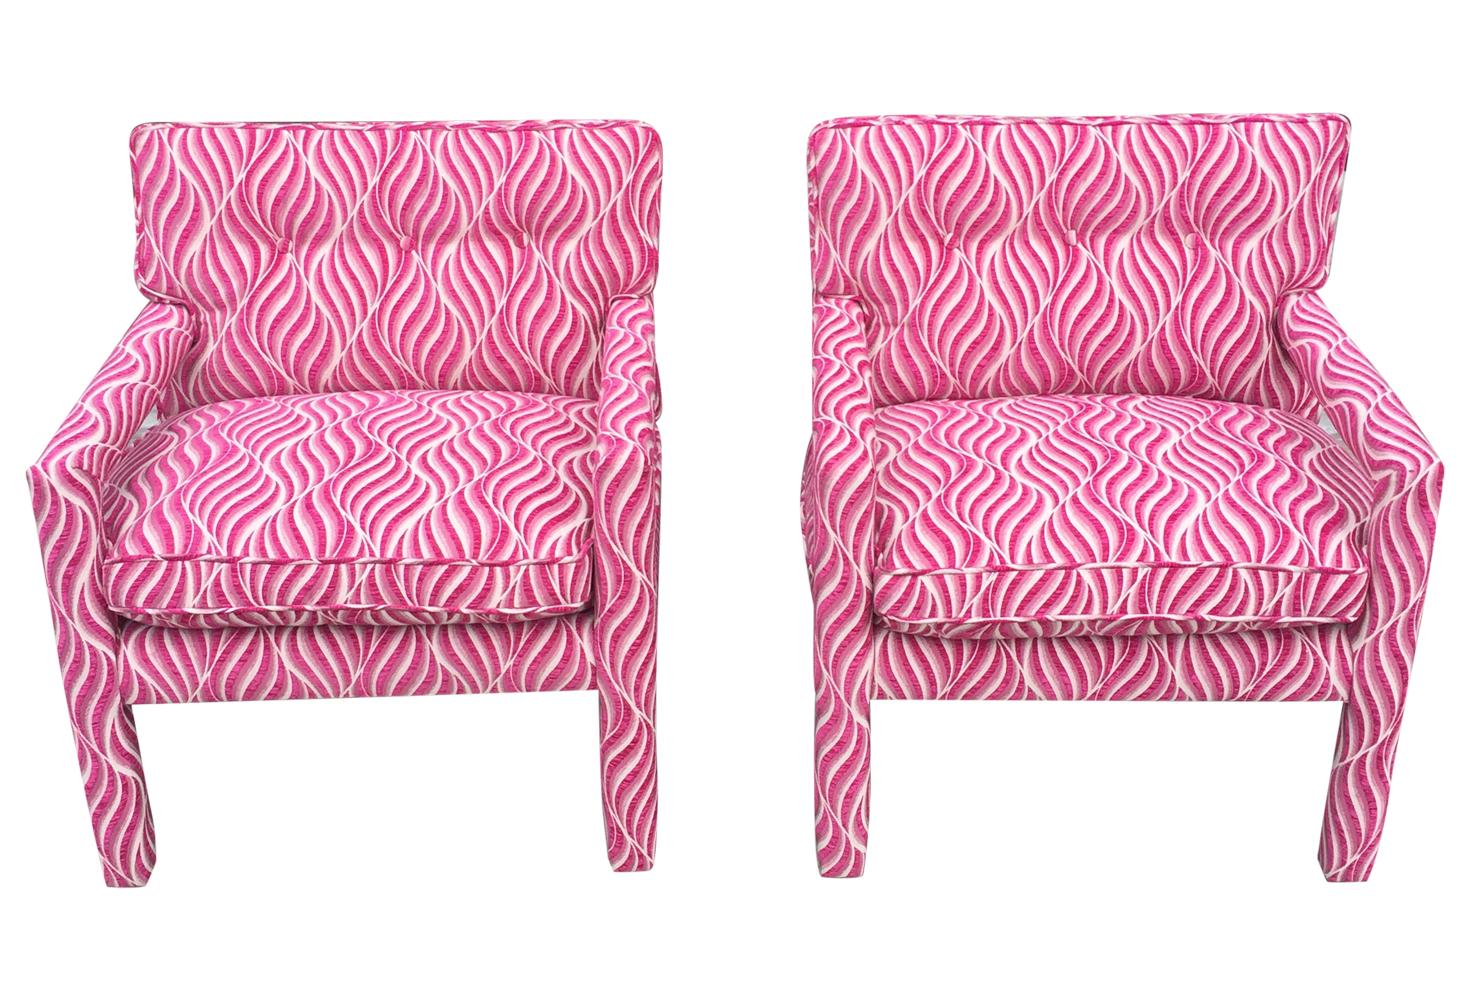 Gorgeous pair of 1970s Parsons chairs freshly upholstered in a print reminiscent of zebra.